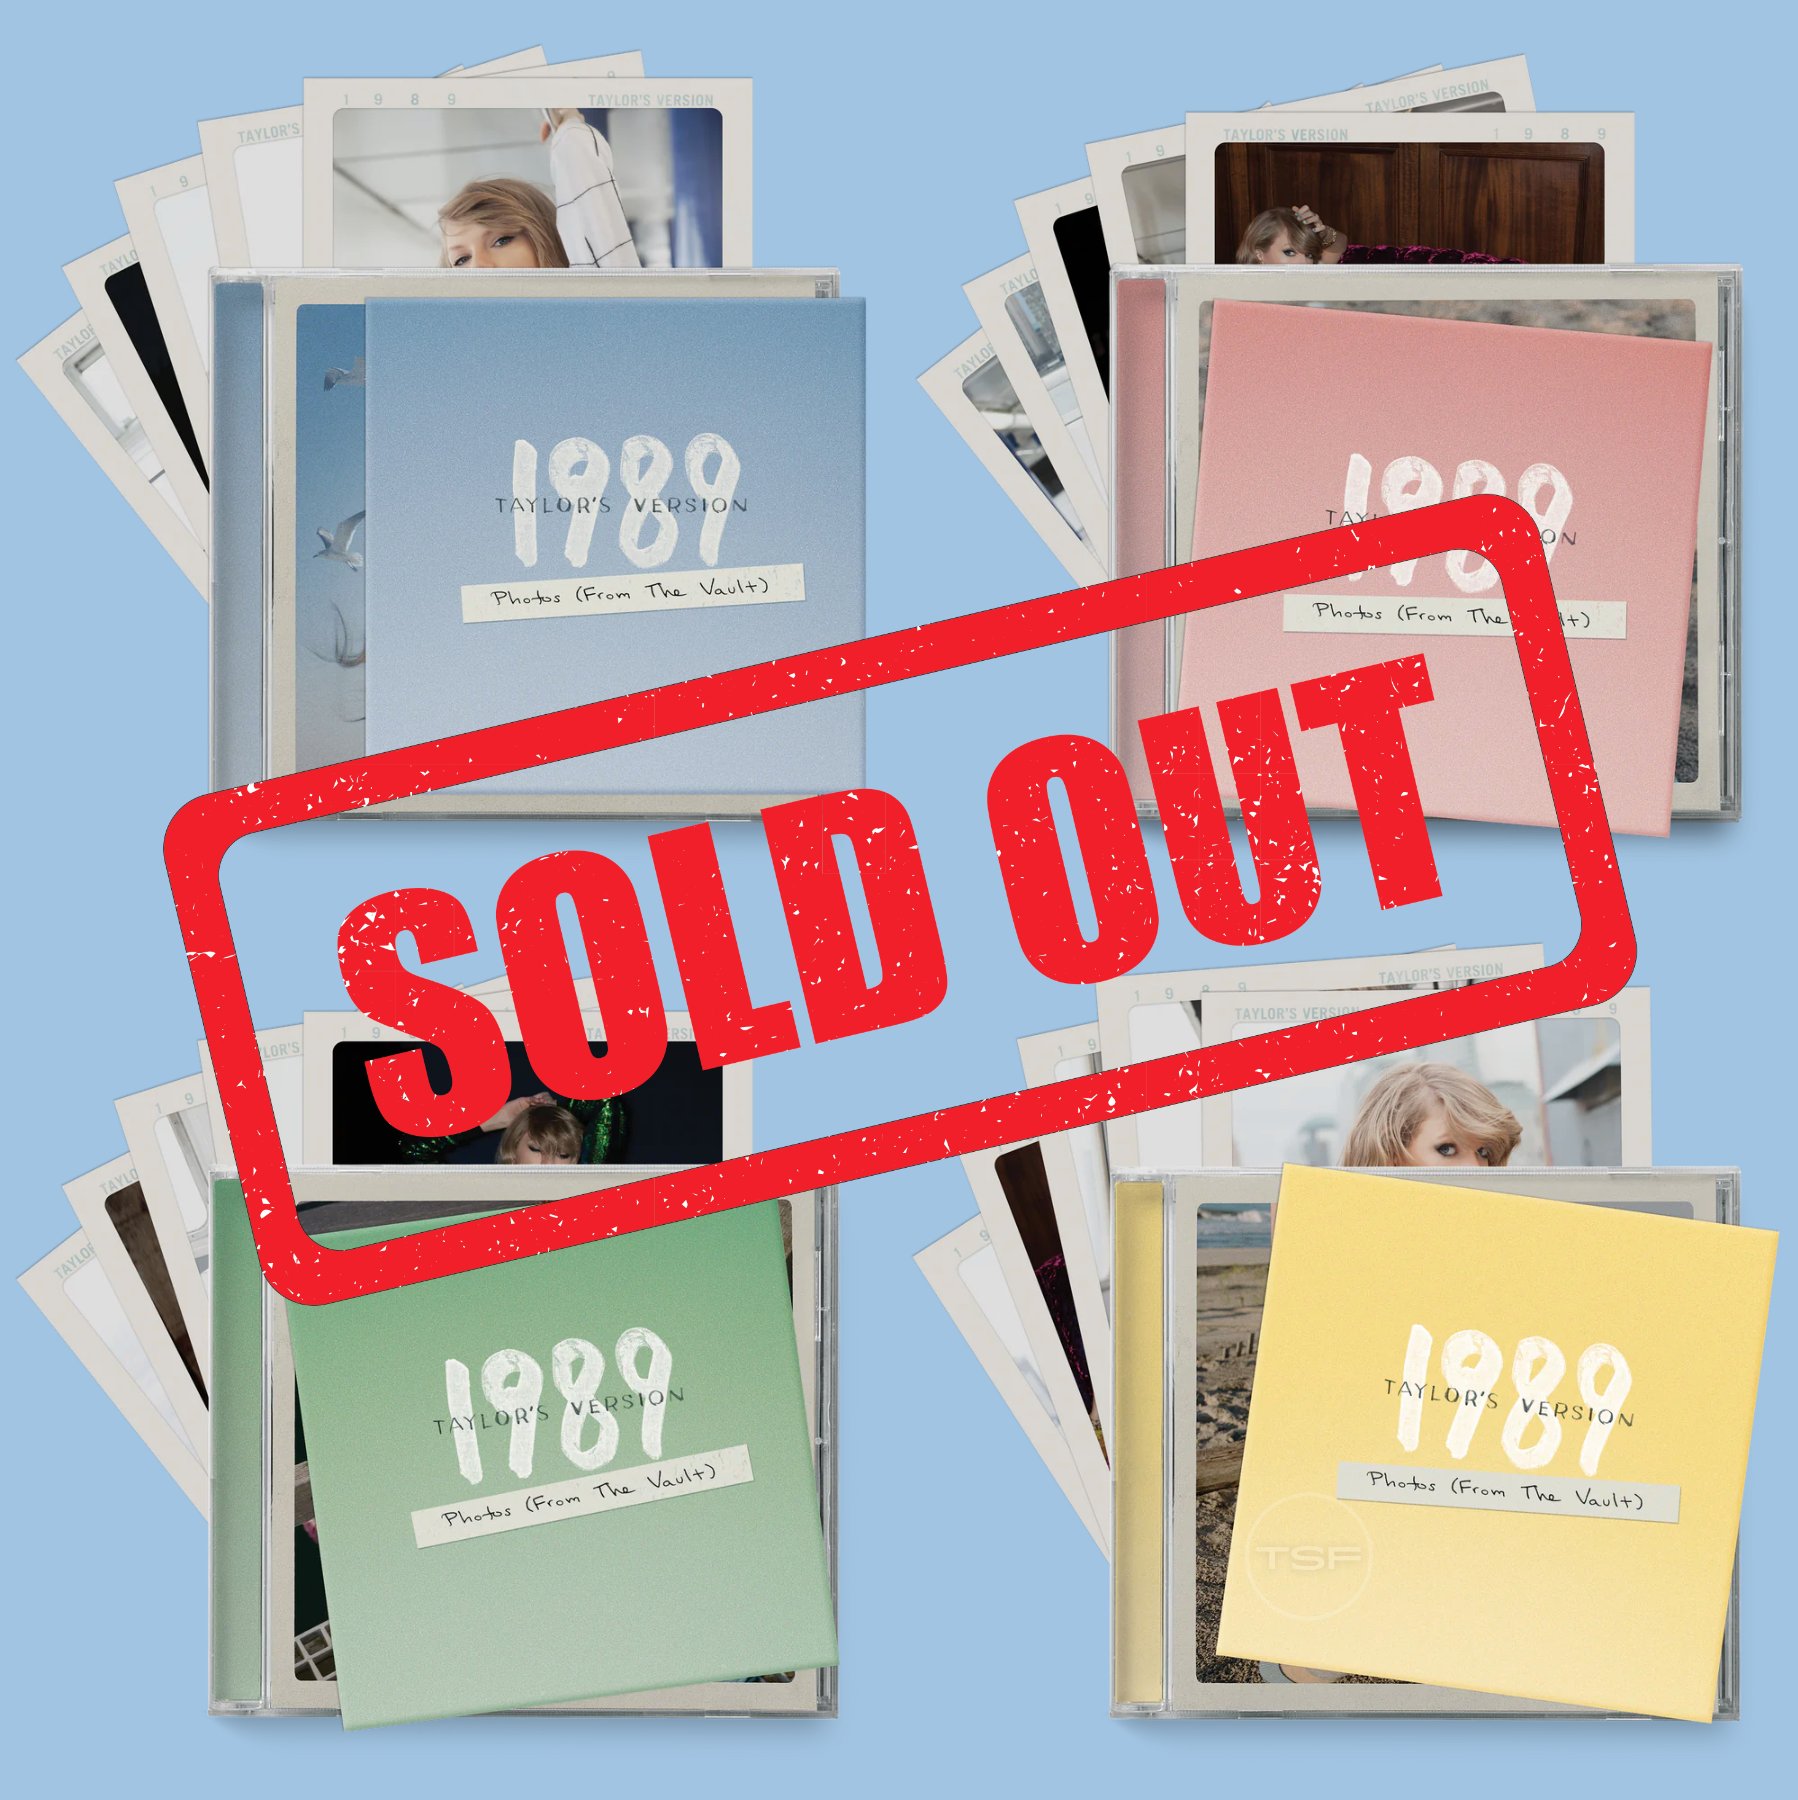 Taylor Swift Facts on X: ‼️  All 4 variants of “1989 (Taylor's Version)”  are completely SOLD OUT. — The Deluxe CD's alone sold 240,000 copies under  a day.  / X